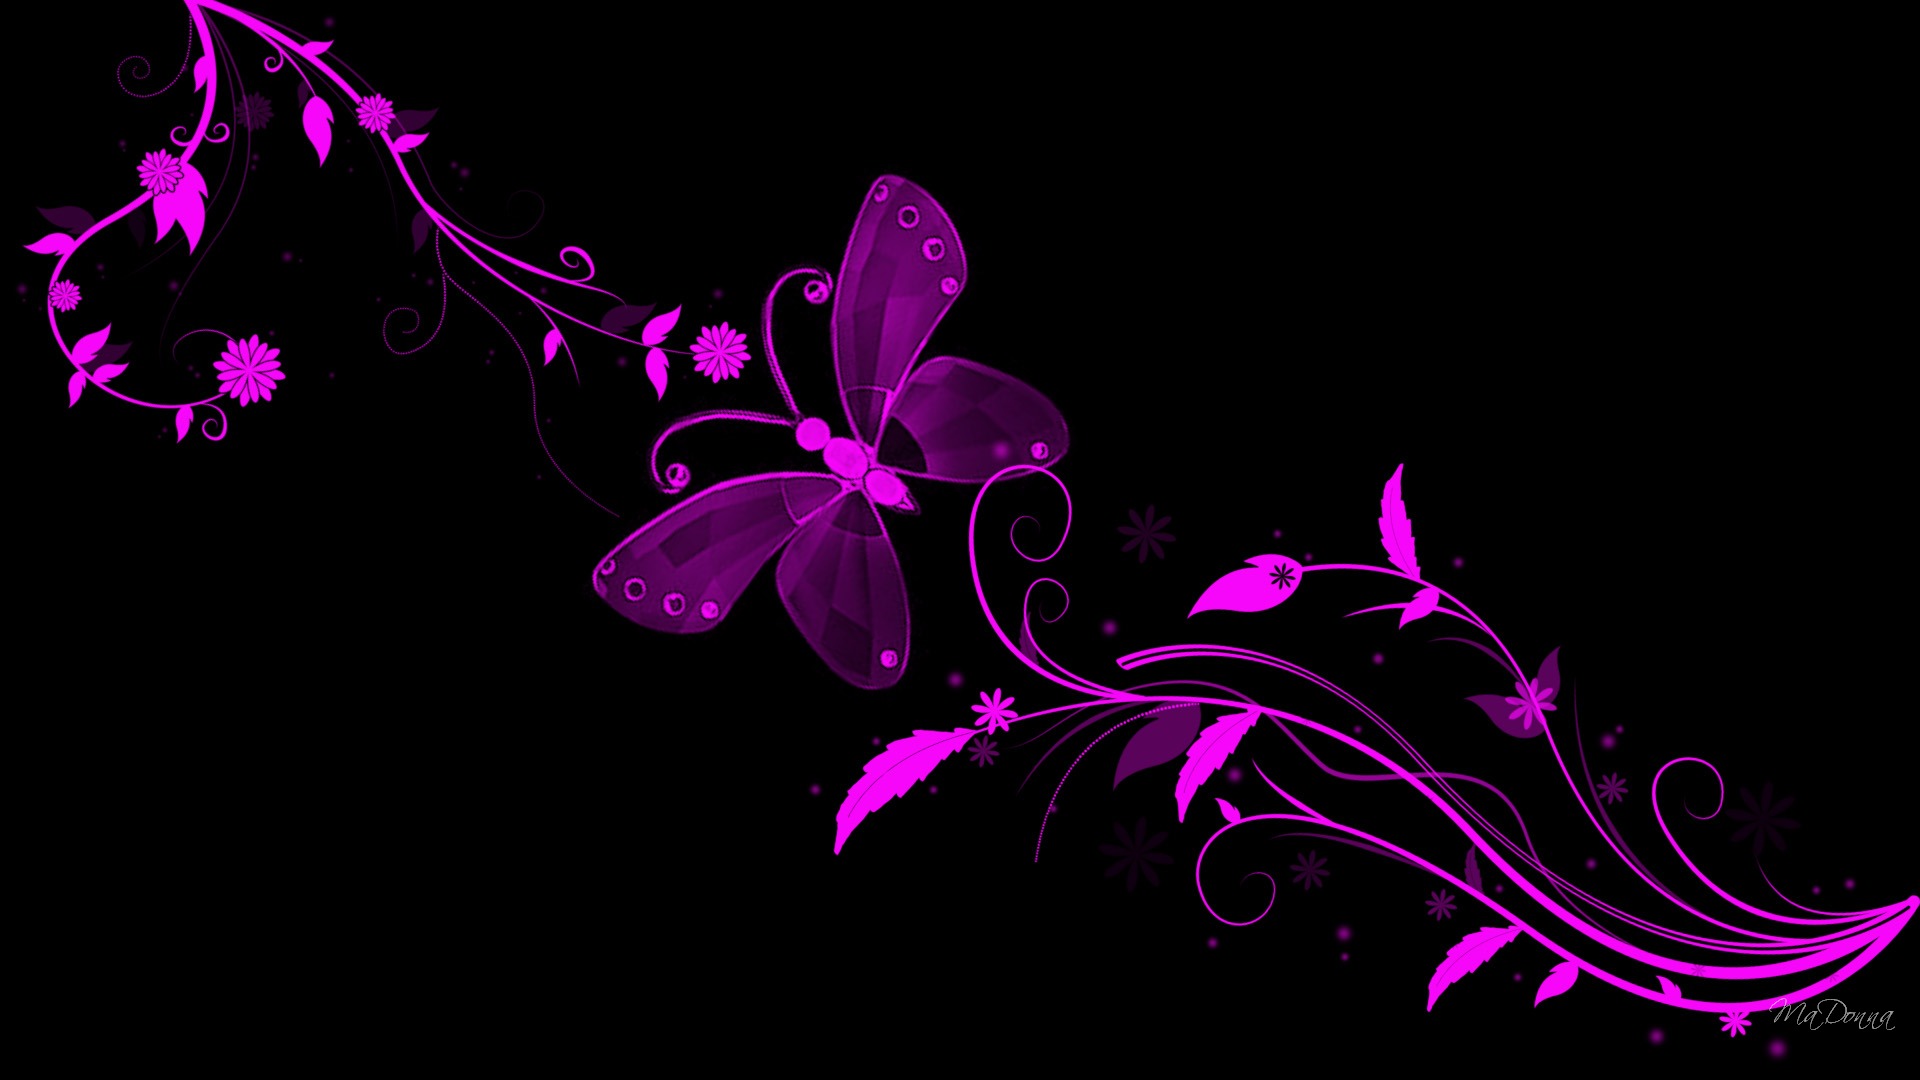 Black And Purple Abstract Wallpaper Images amp Pictures   Becuo